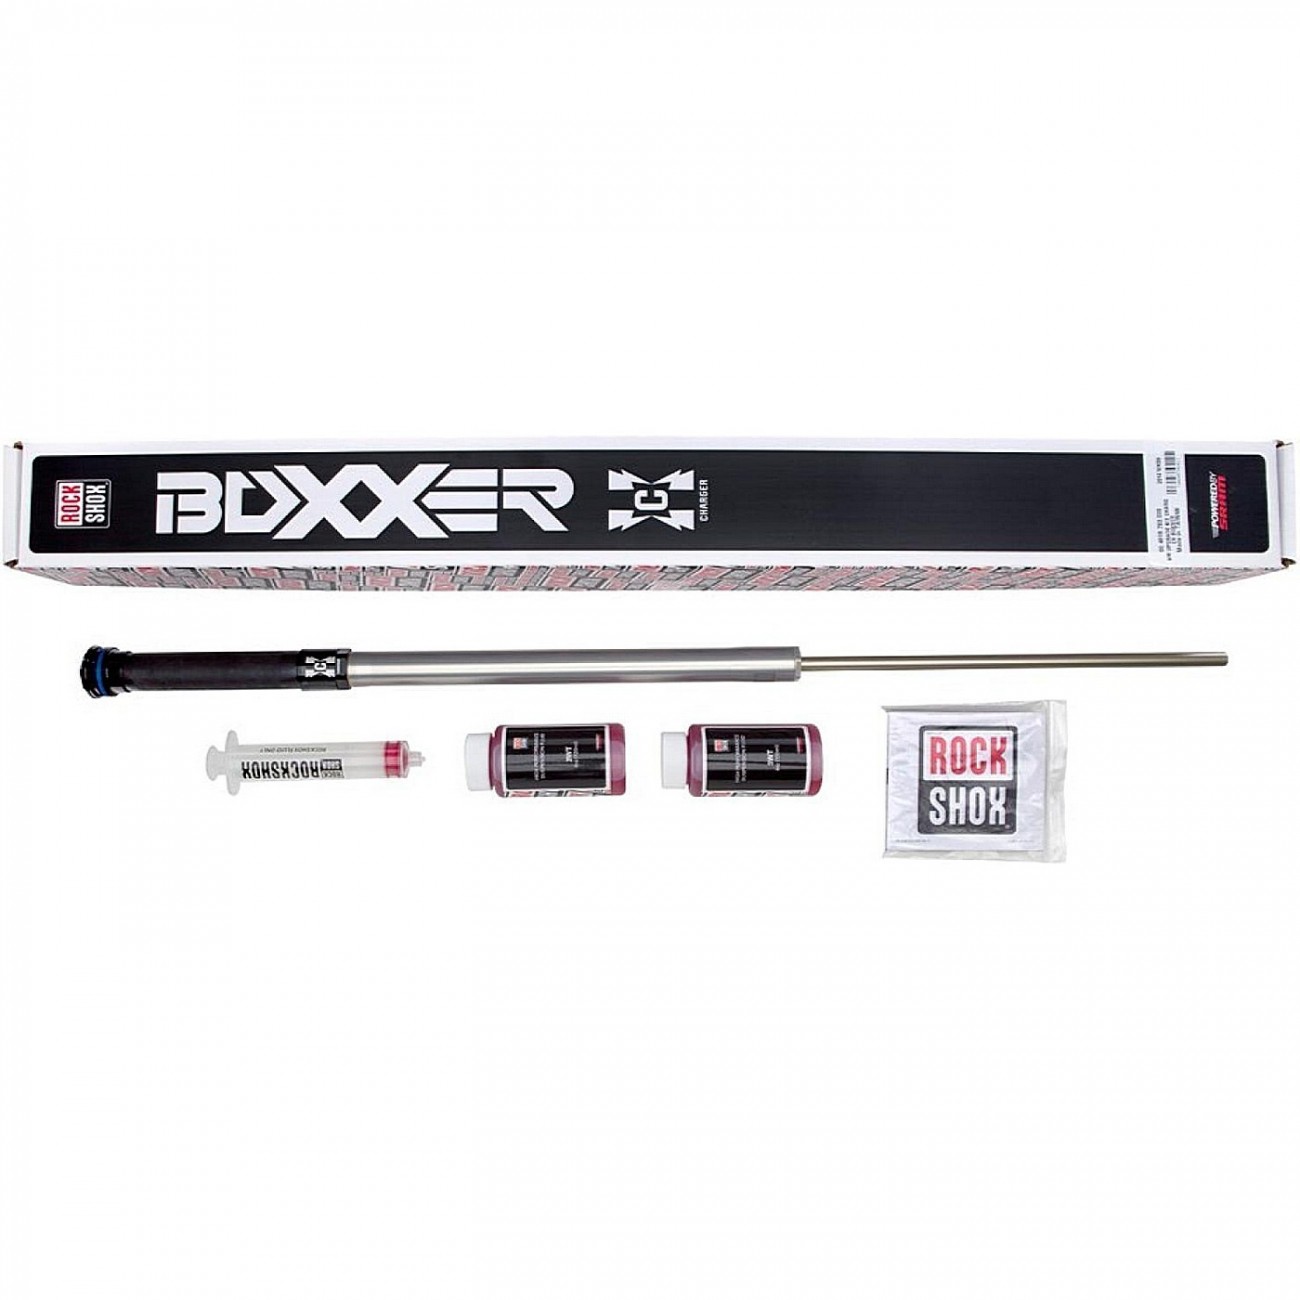 Damper upgrade kit - charger - includes complete right sideinternals - boxxer ( - 1